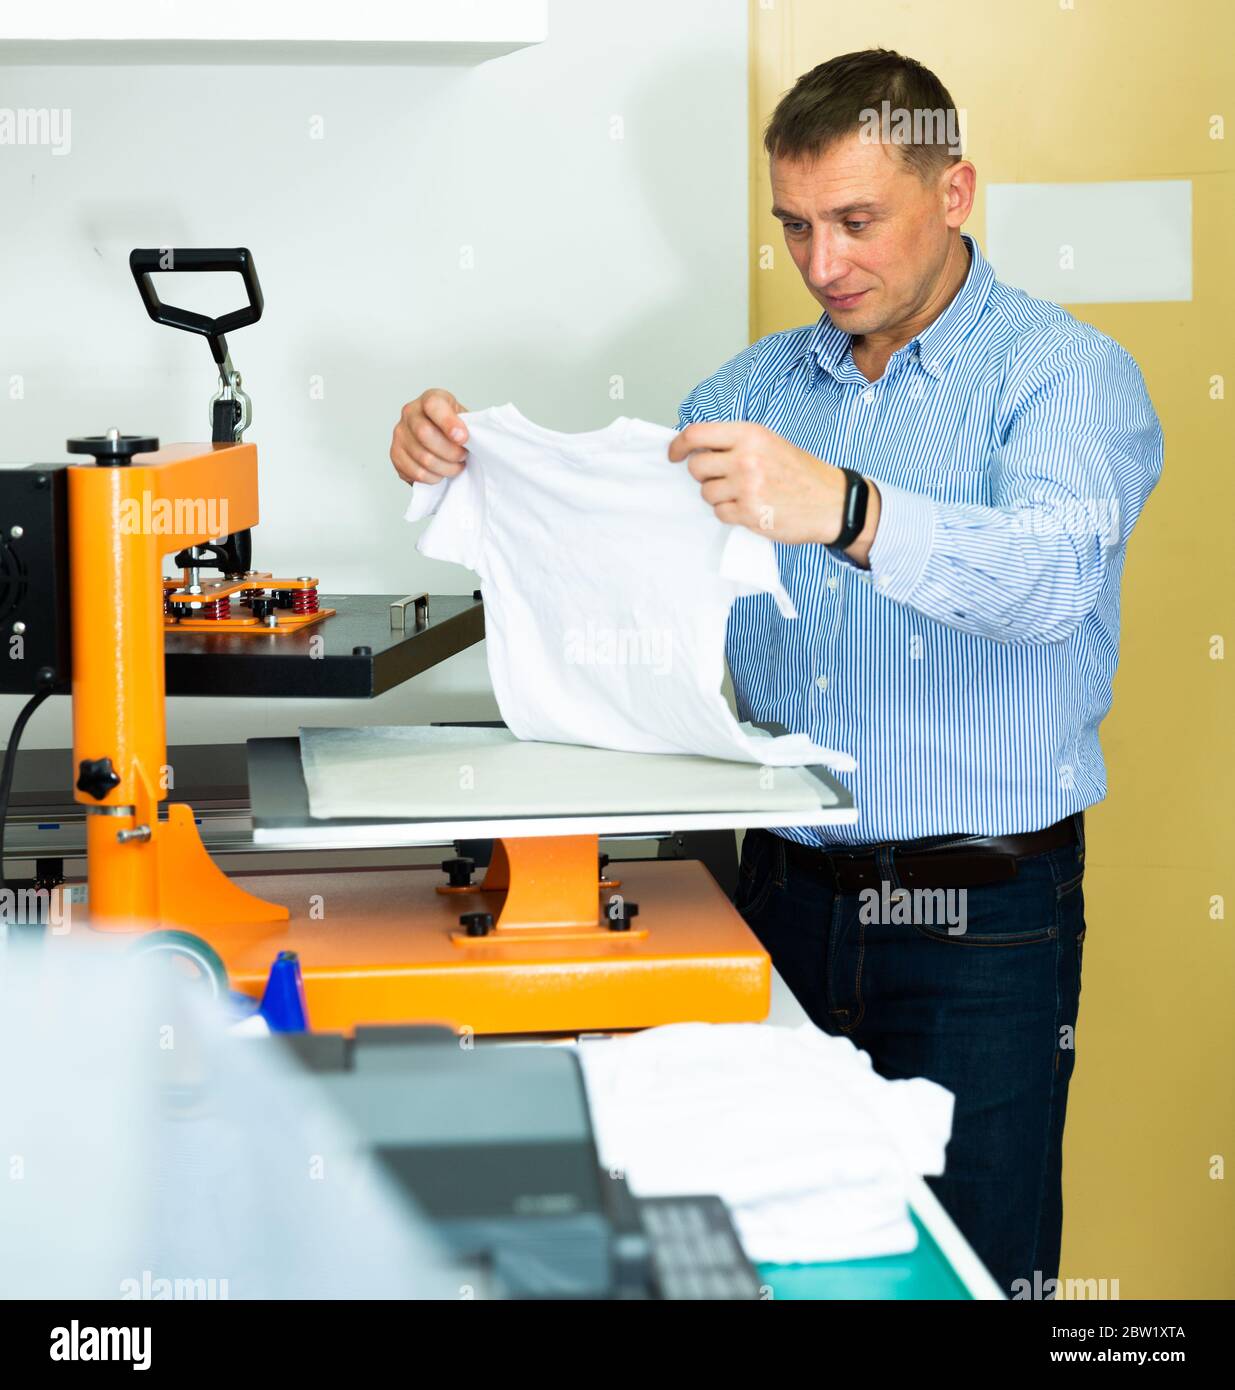 Man printing t-shirt in a workshop Stock Photo